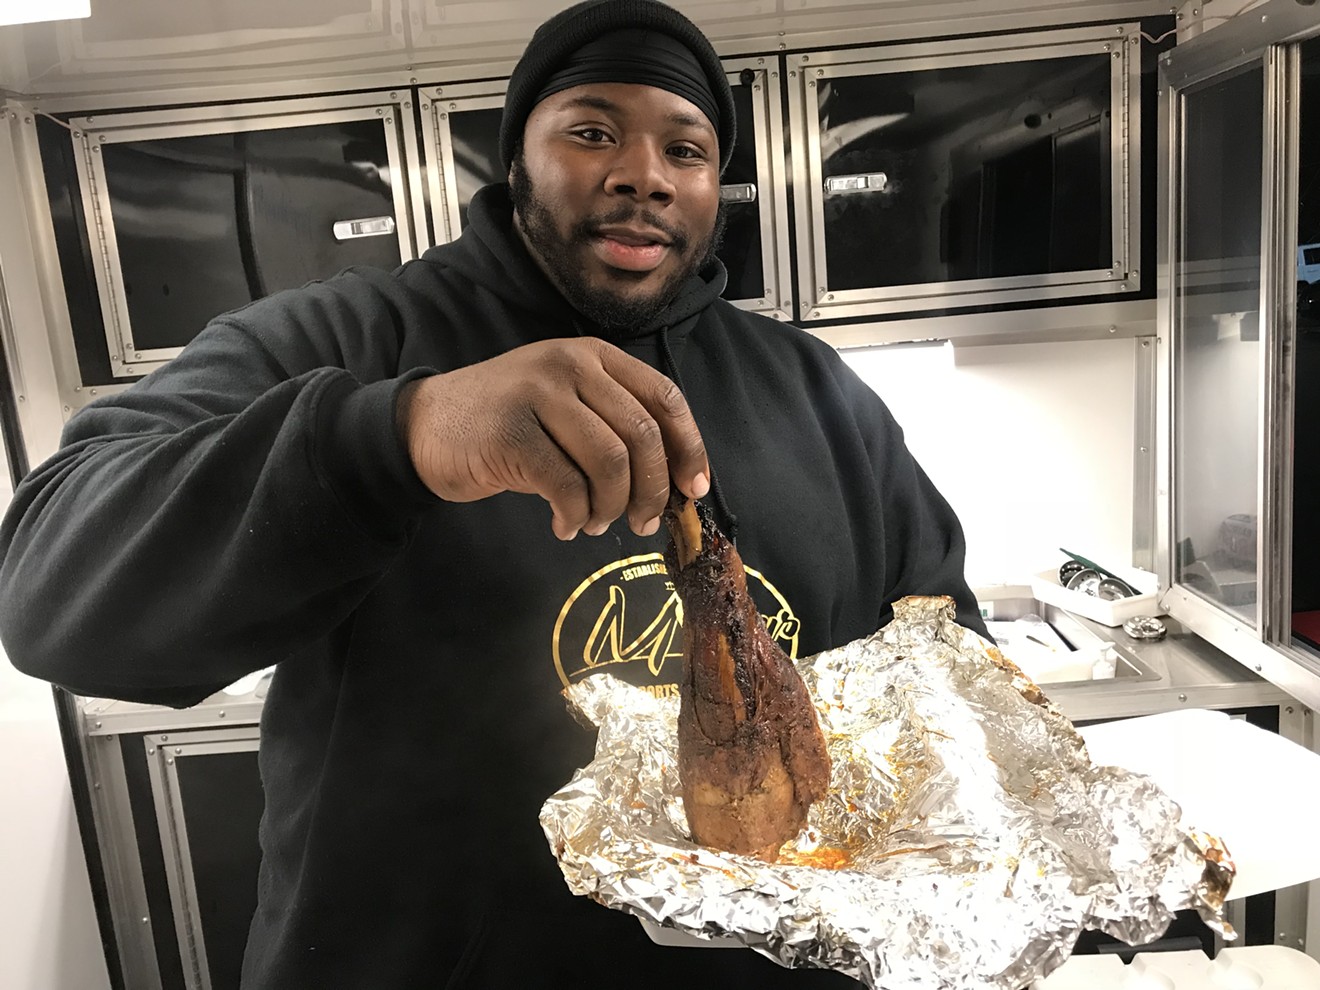 For Corey Bradley Jr. of Corey's Catering, turkey legs aren't just for the state fair.